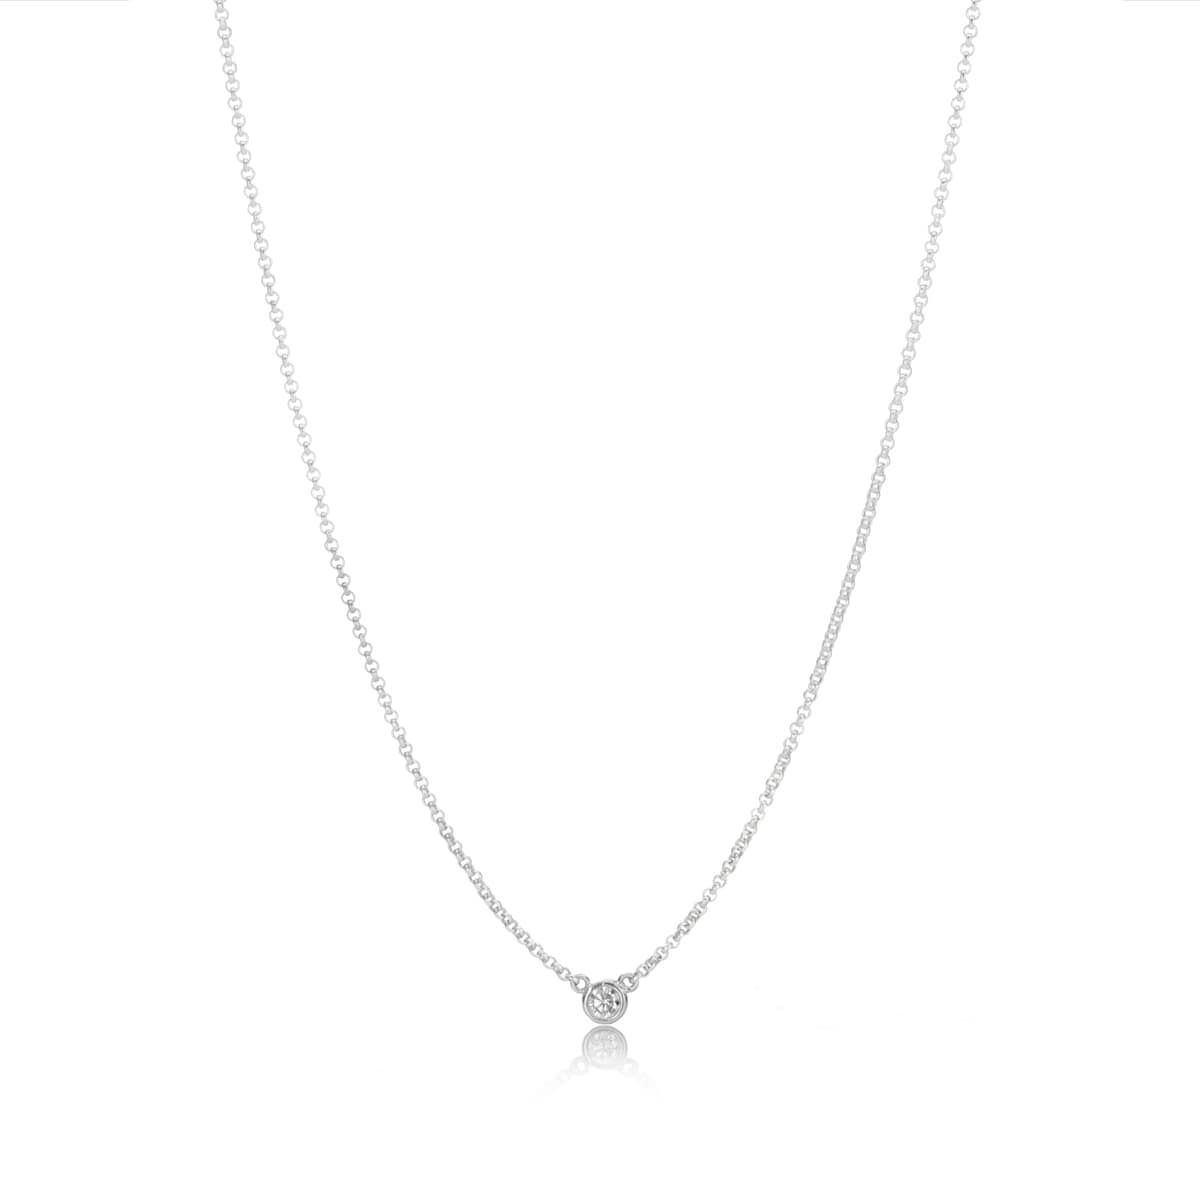 Heirloom Solitaire Diamond Silver Necklace